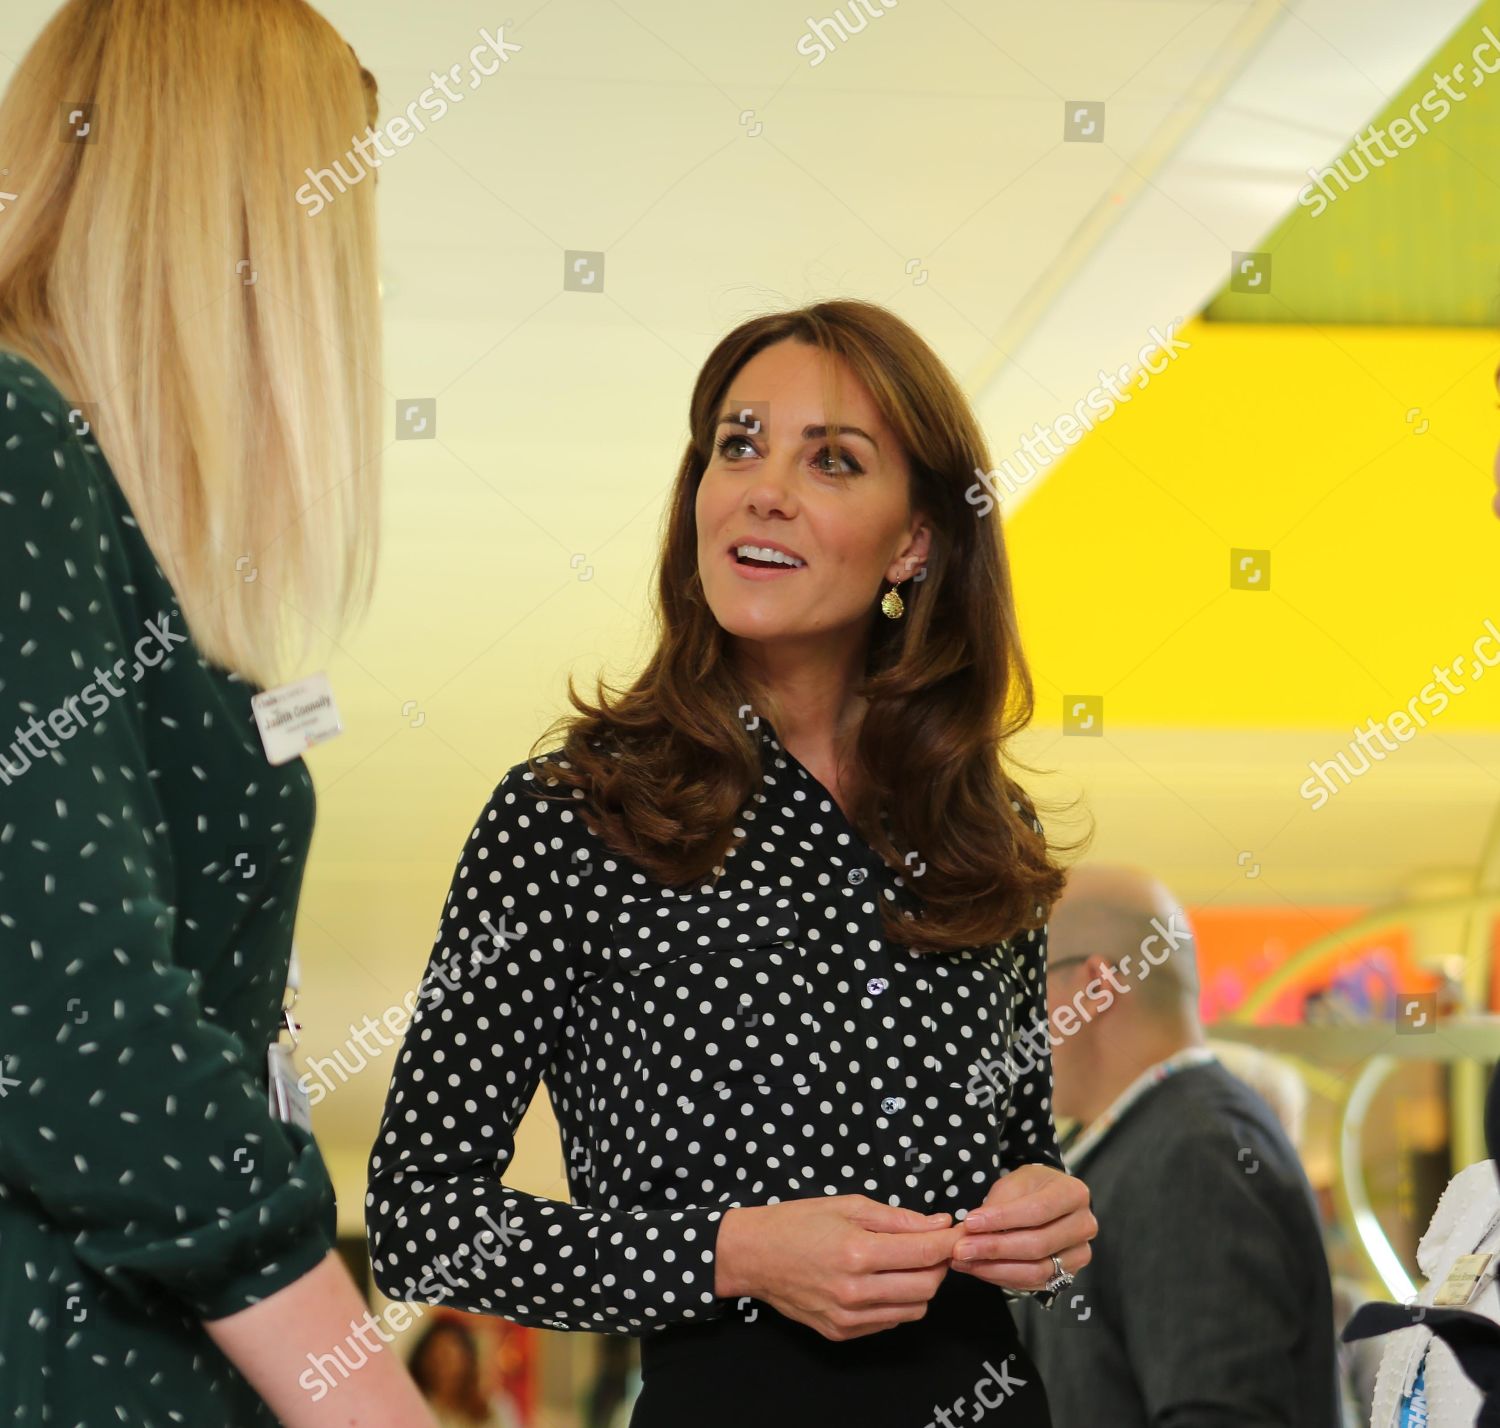 catherine-duchess-of-cambridge-visits-sunshine-house-children-and-young-peoples-health-and-development-centre-peckham-london-uk-shutterstock-editorial-10418221c.jpg